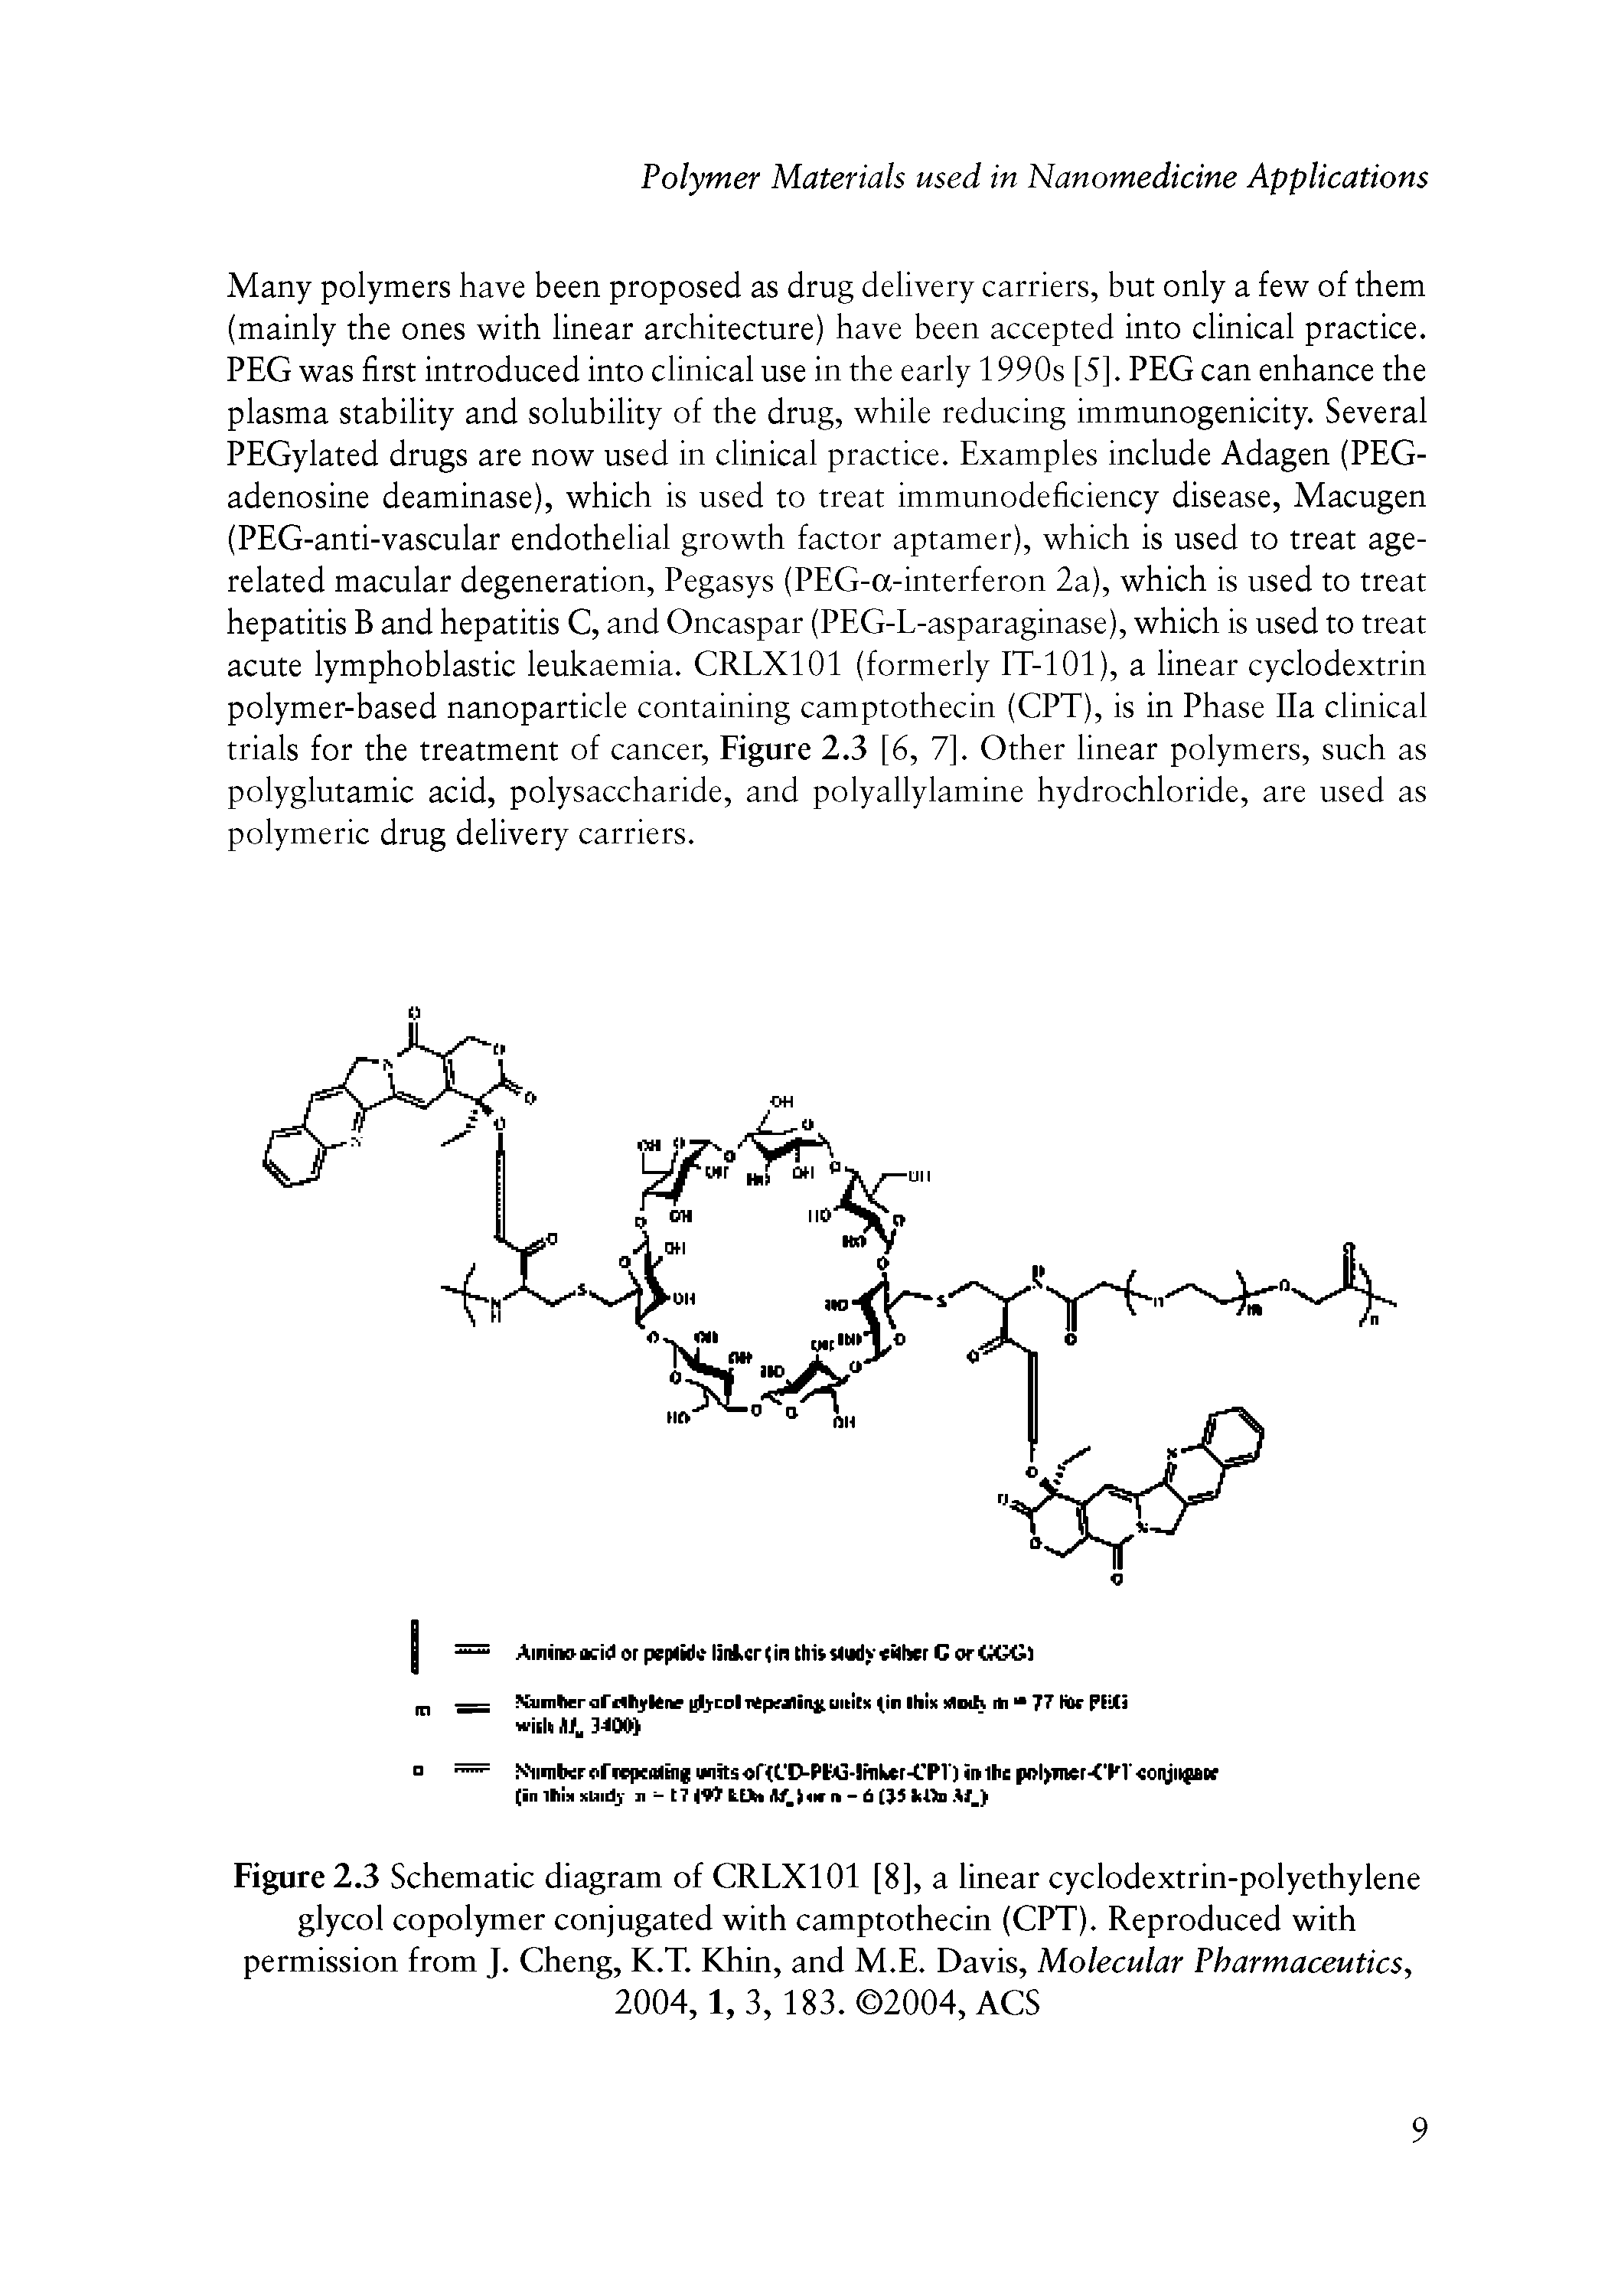 Figure 2.3 Schematic diagram of CRLXIOI [8], a linear cyclodextrin-polyethylene glycol copolymer conjugated with camptothecin (CPT). Reproduced with permission from J. Cheng, K.T. Khin, and M.E. Davis, Molecular Pharmaceutics,...